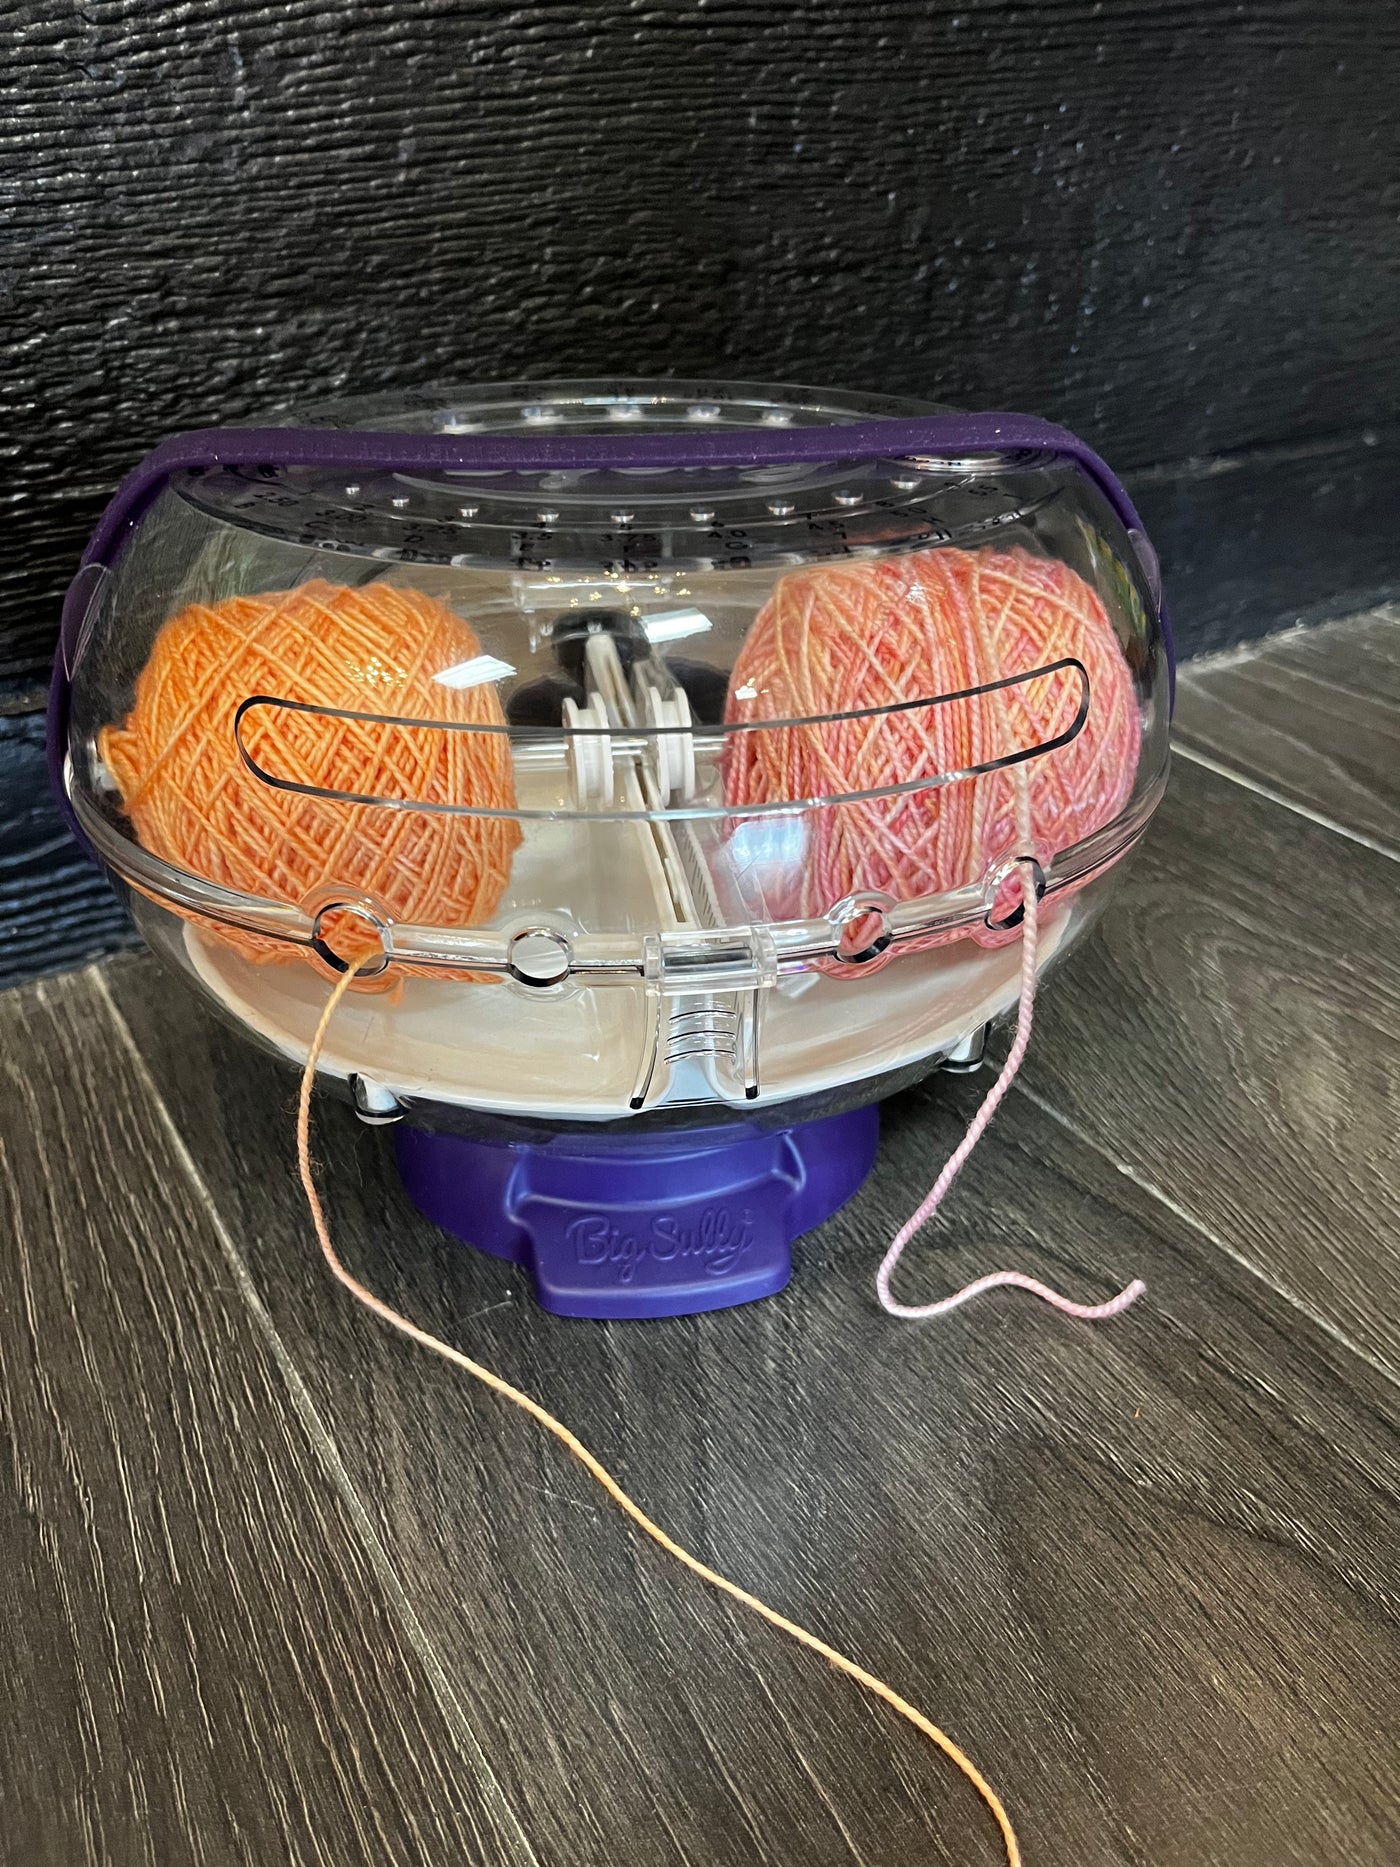 A double yarn ball holder made of clear plastic with a purple base that reads "Big Sully" on a wood floor. It is holding peach cakes of yarn. 